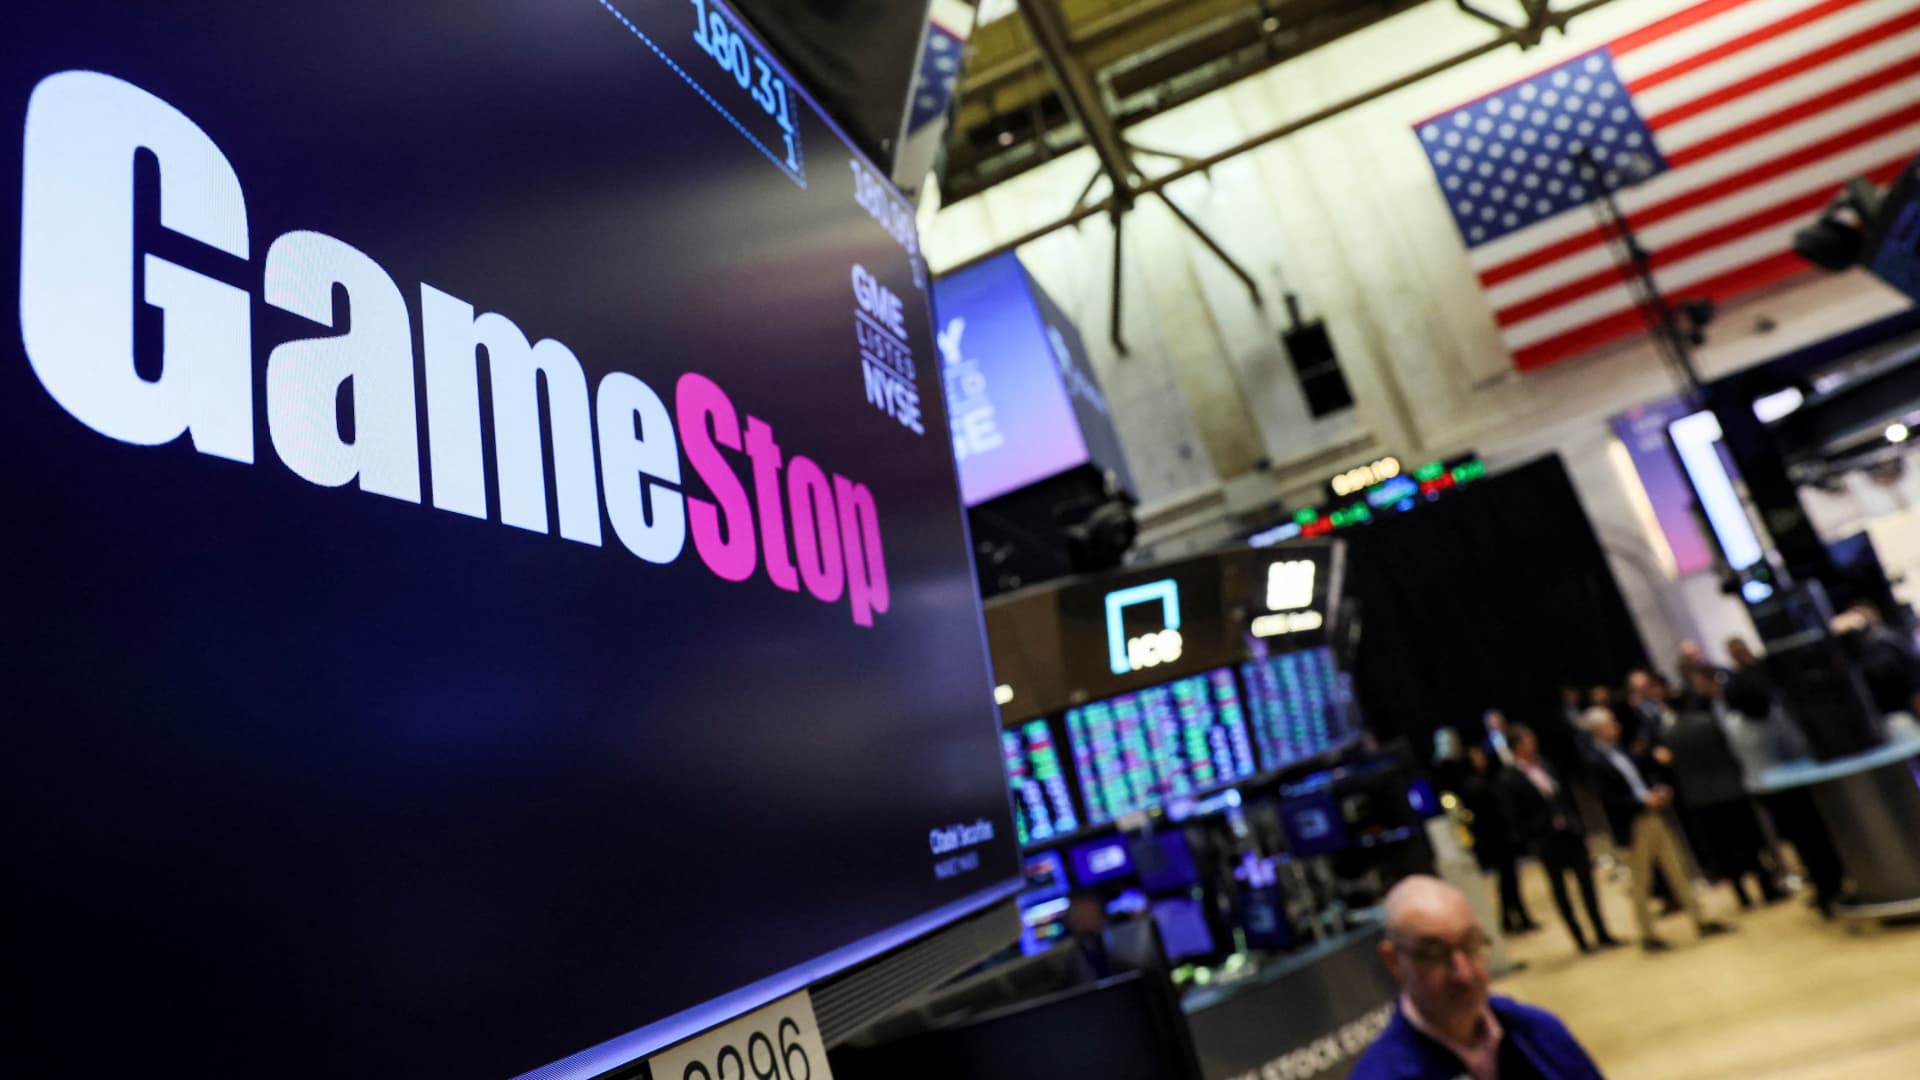 Stocks making the biggest moves premarket: Ciena, GameStop, Rent The Runway and others